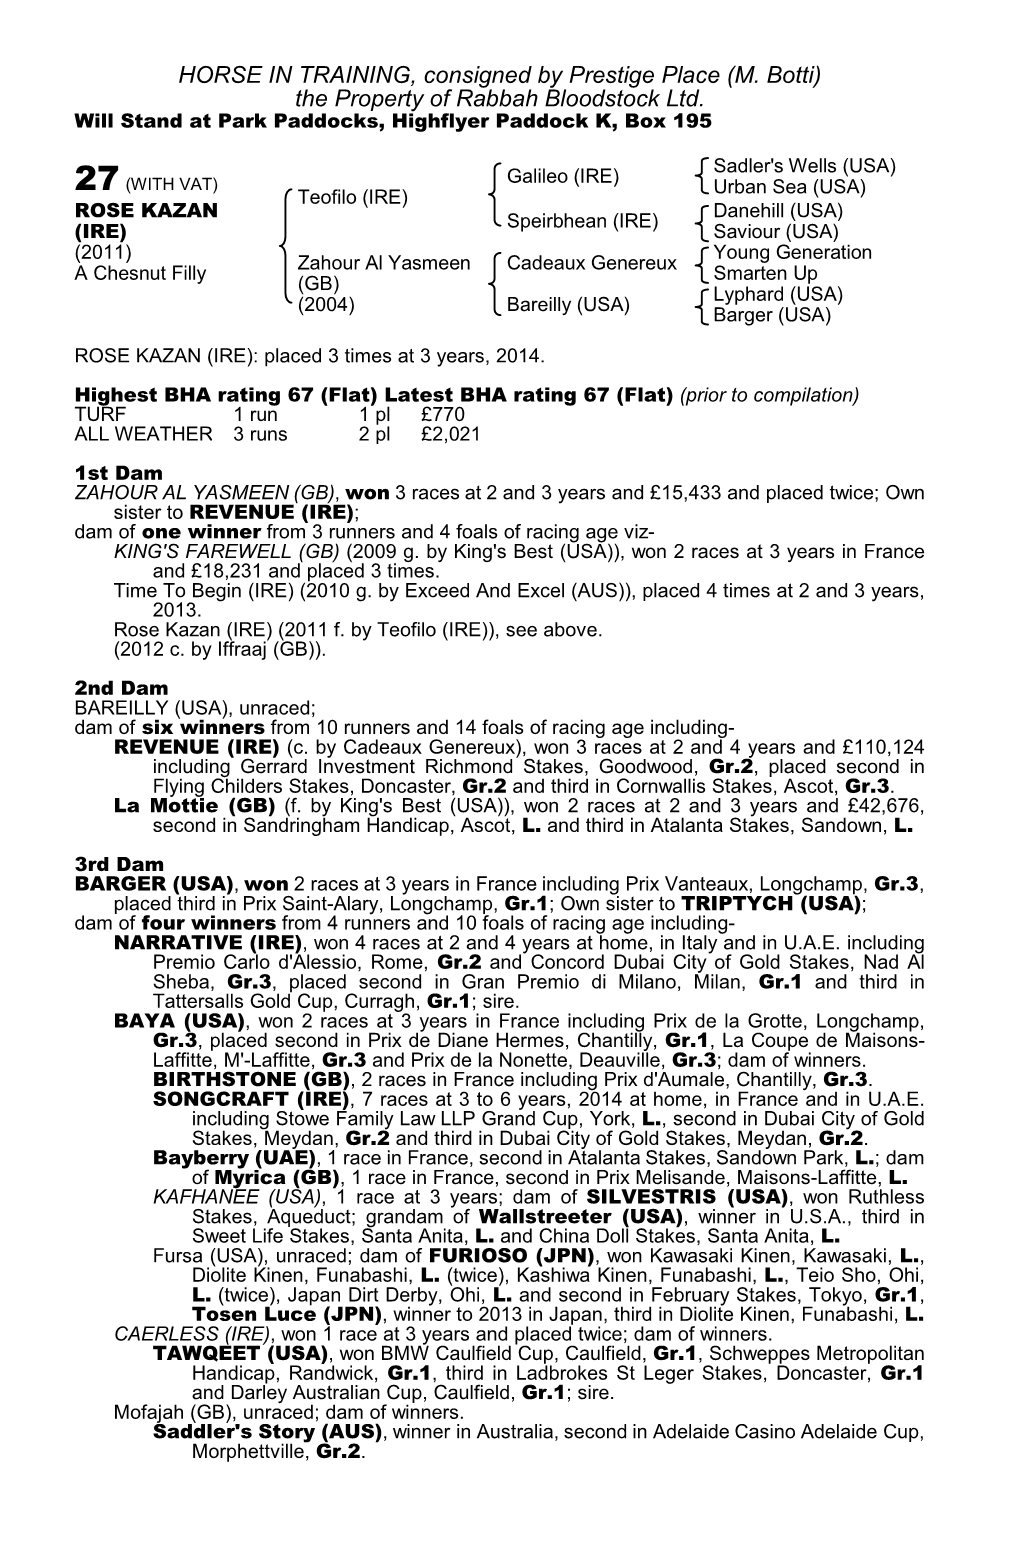 HORSE in TRAINING, Consigned by Prestige Place (M. Botti) the Property of Rabbah Bloodstock Ltd